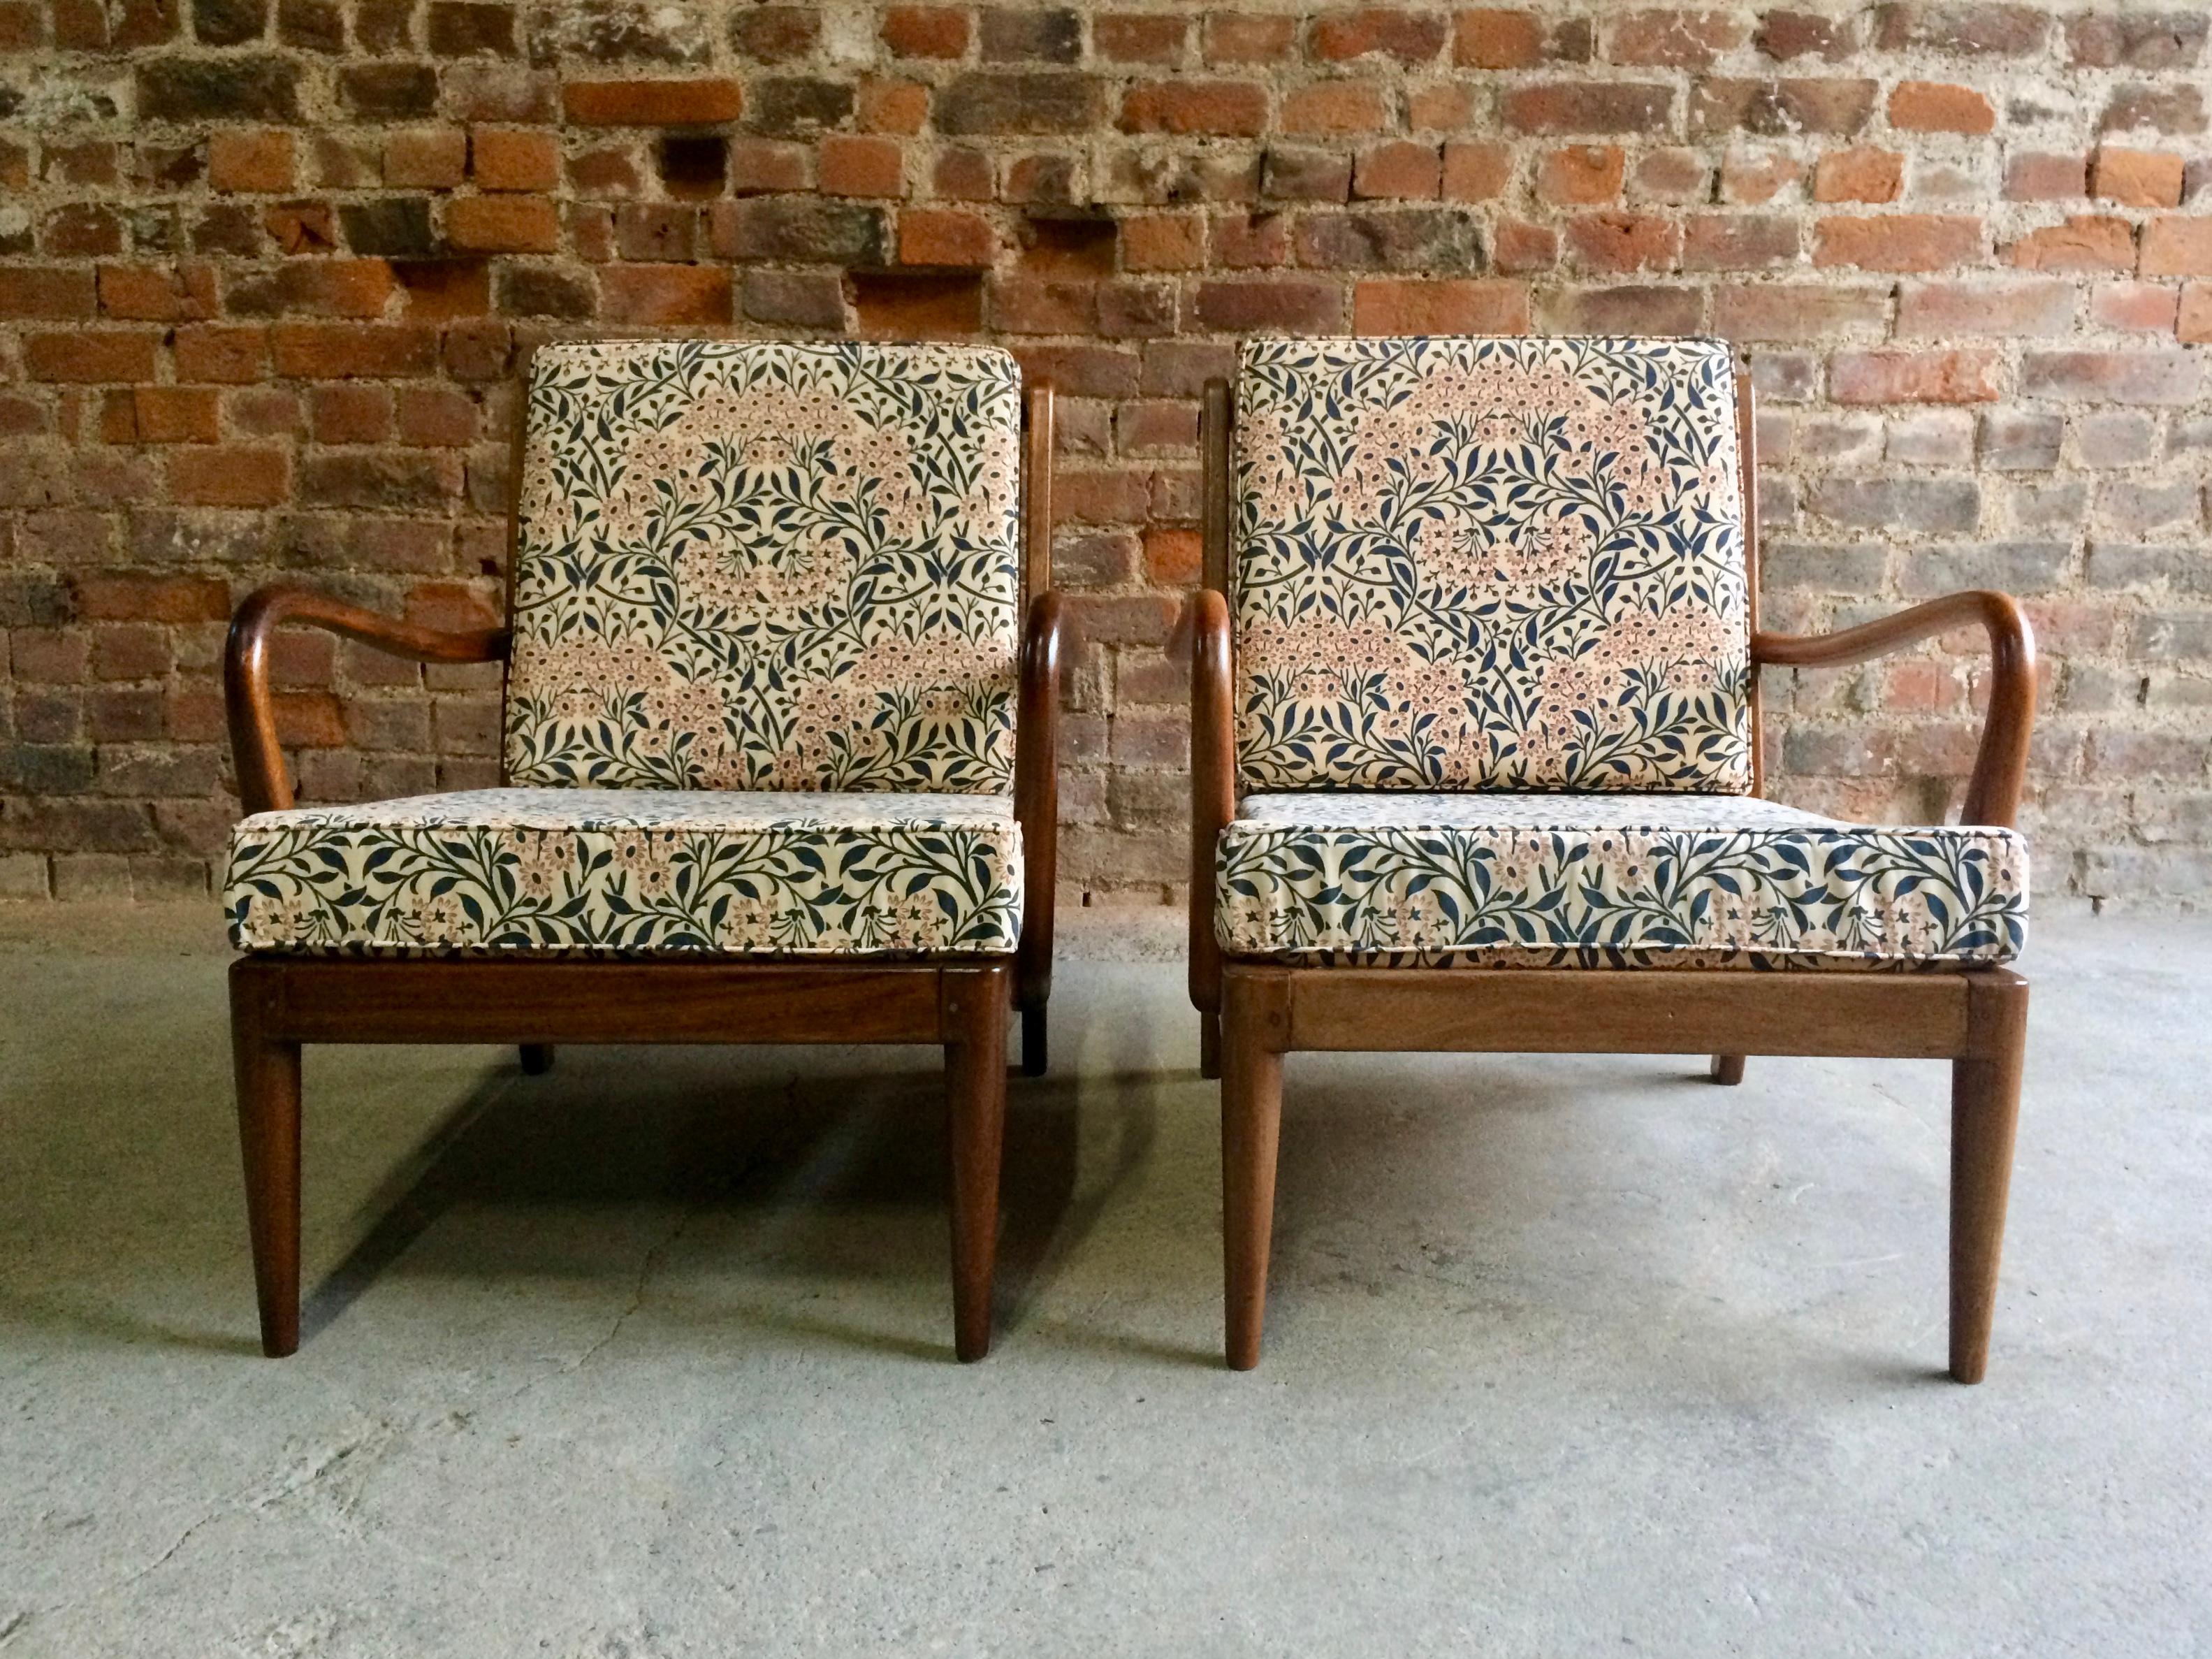 20th Century Rare Pair of Robert Heritage Armchairs by George Stone of High Wycombe